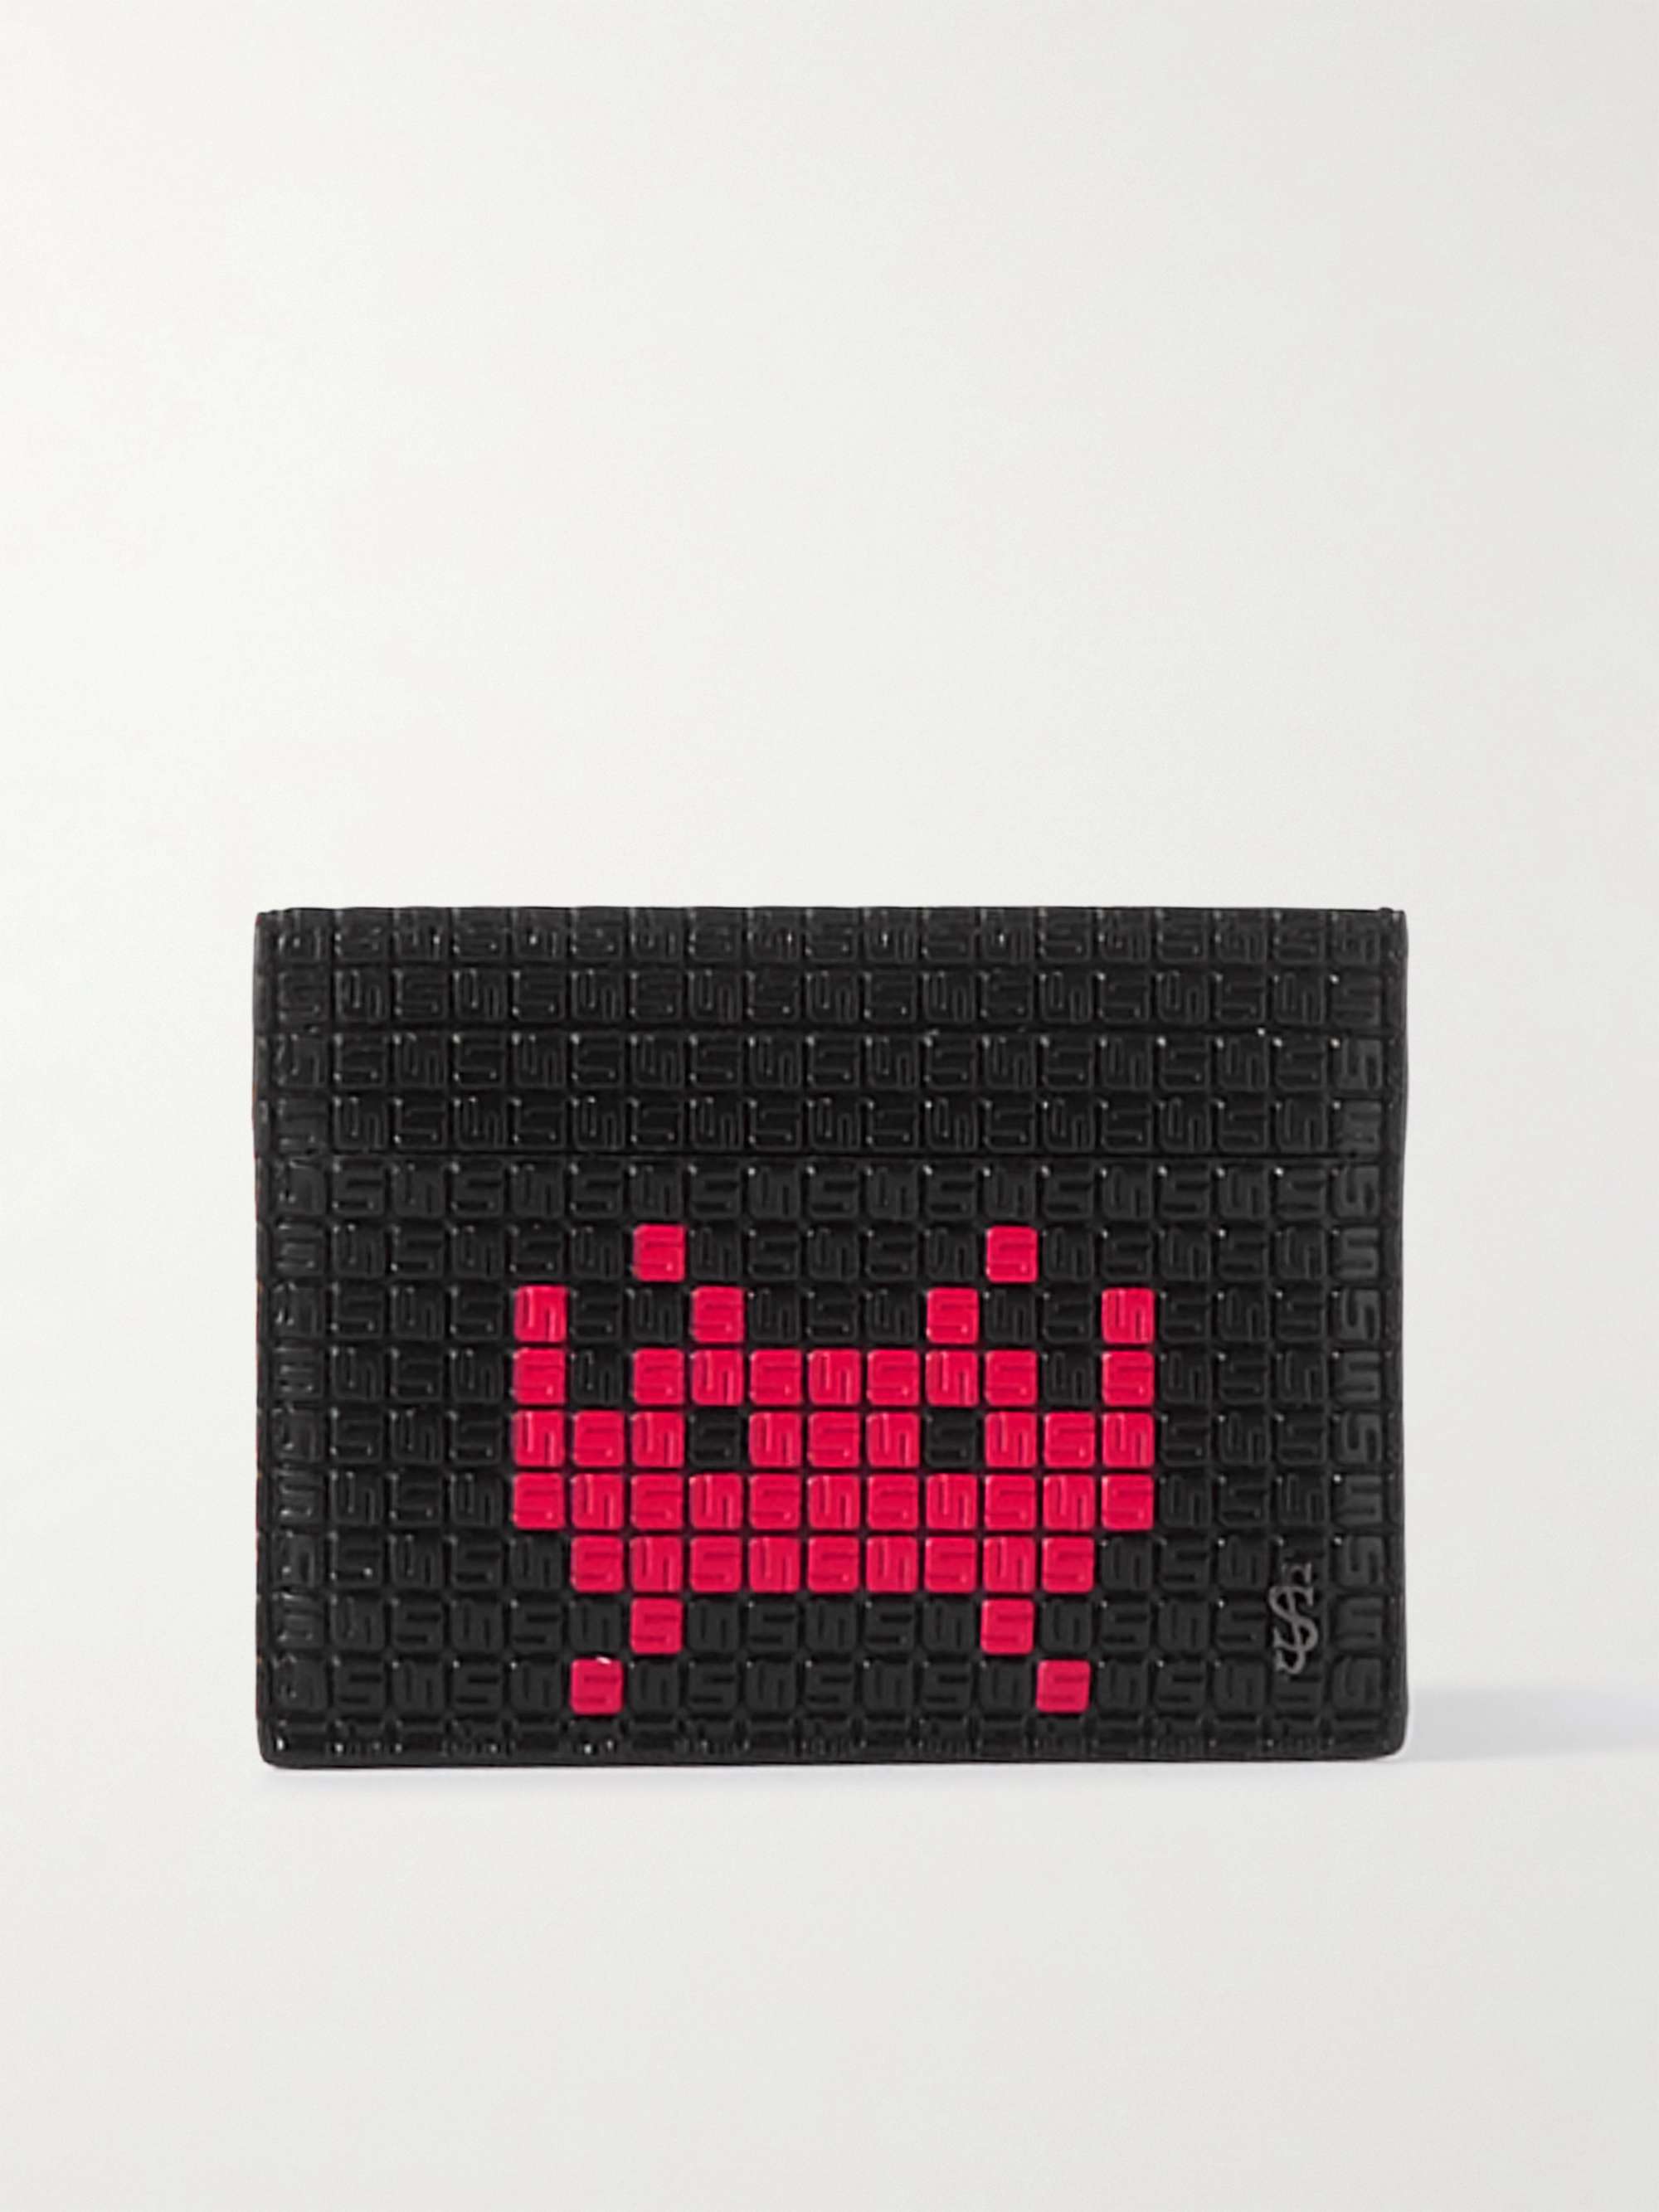 SERAPIAN + Space Invaders Printed Stepan Coated-Canvas and Leather Cardholder